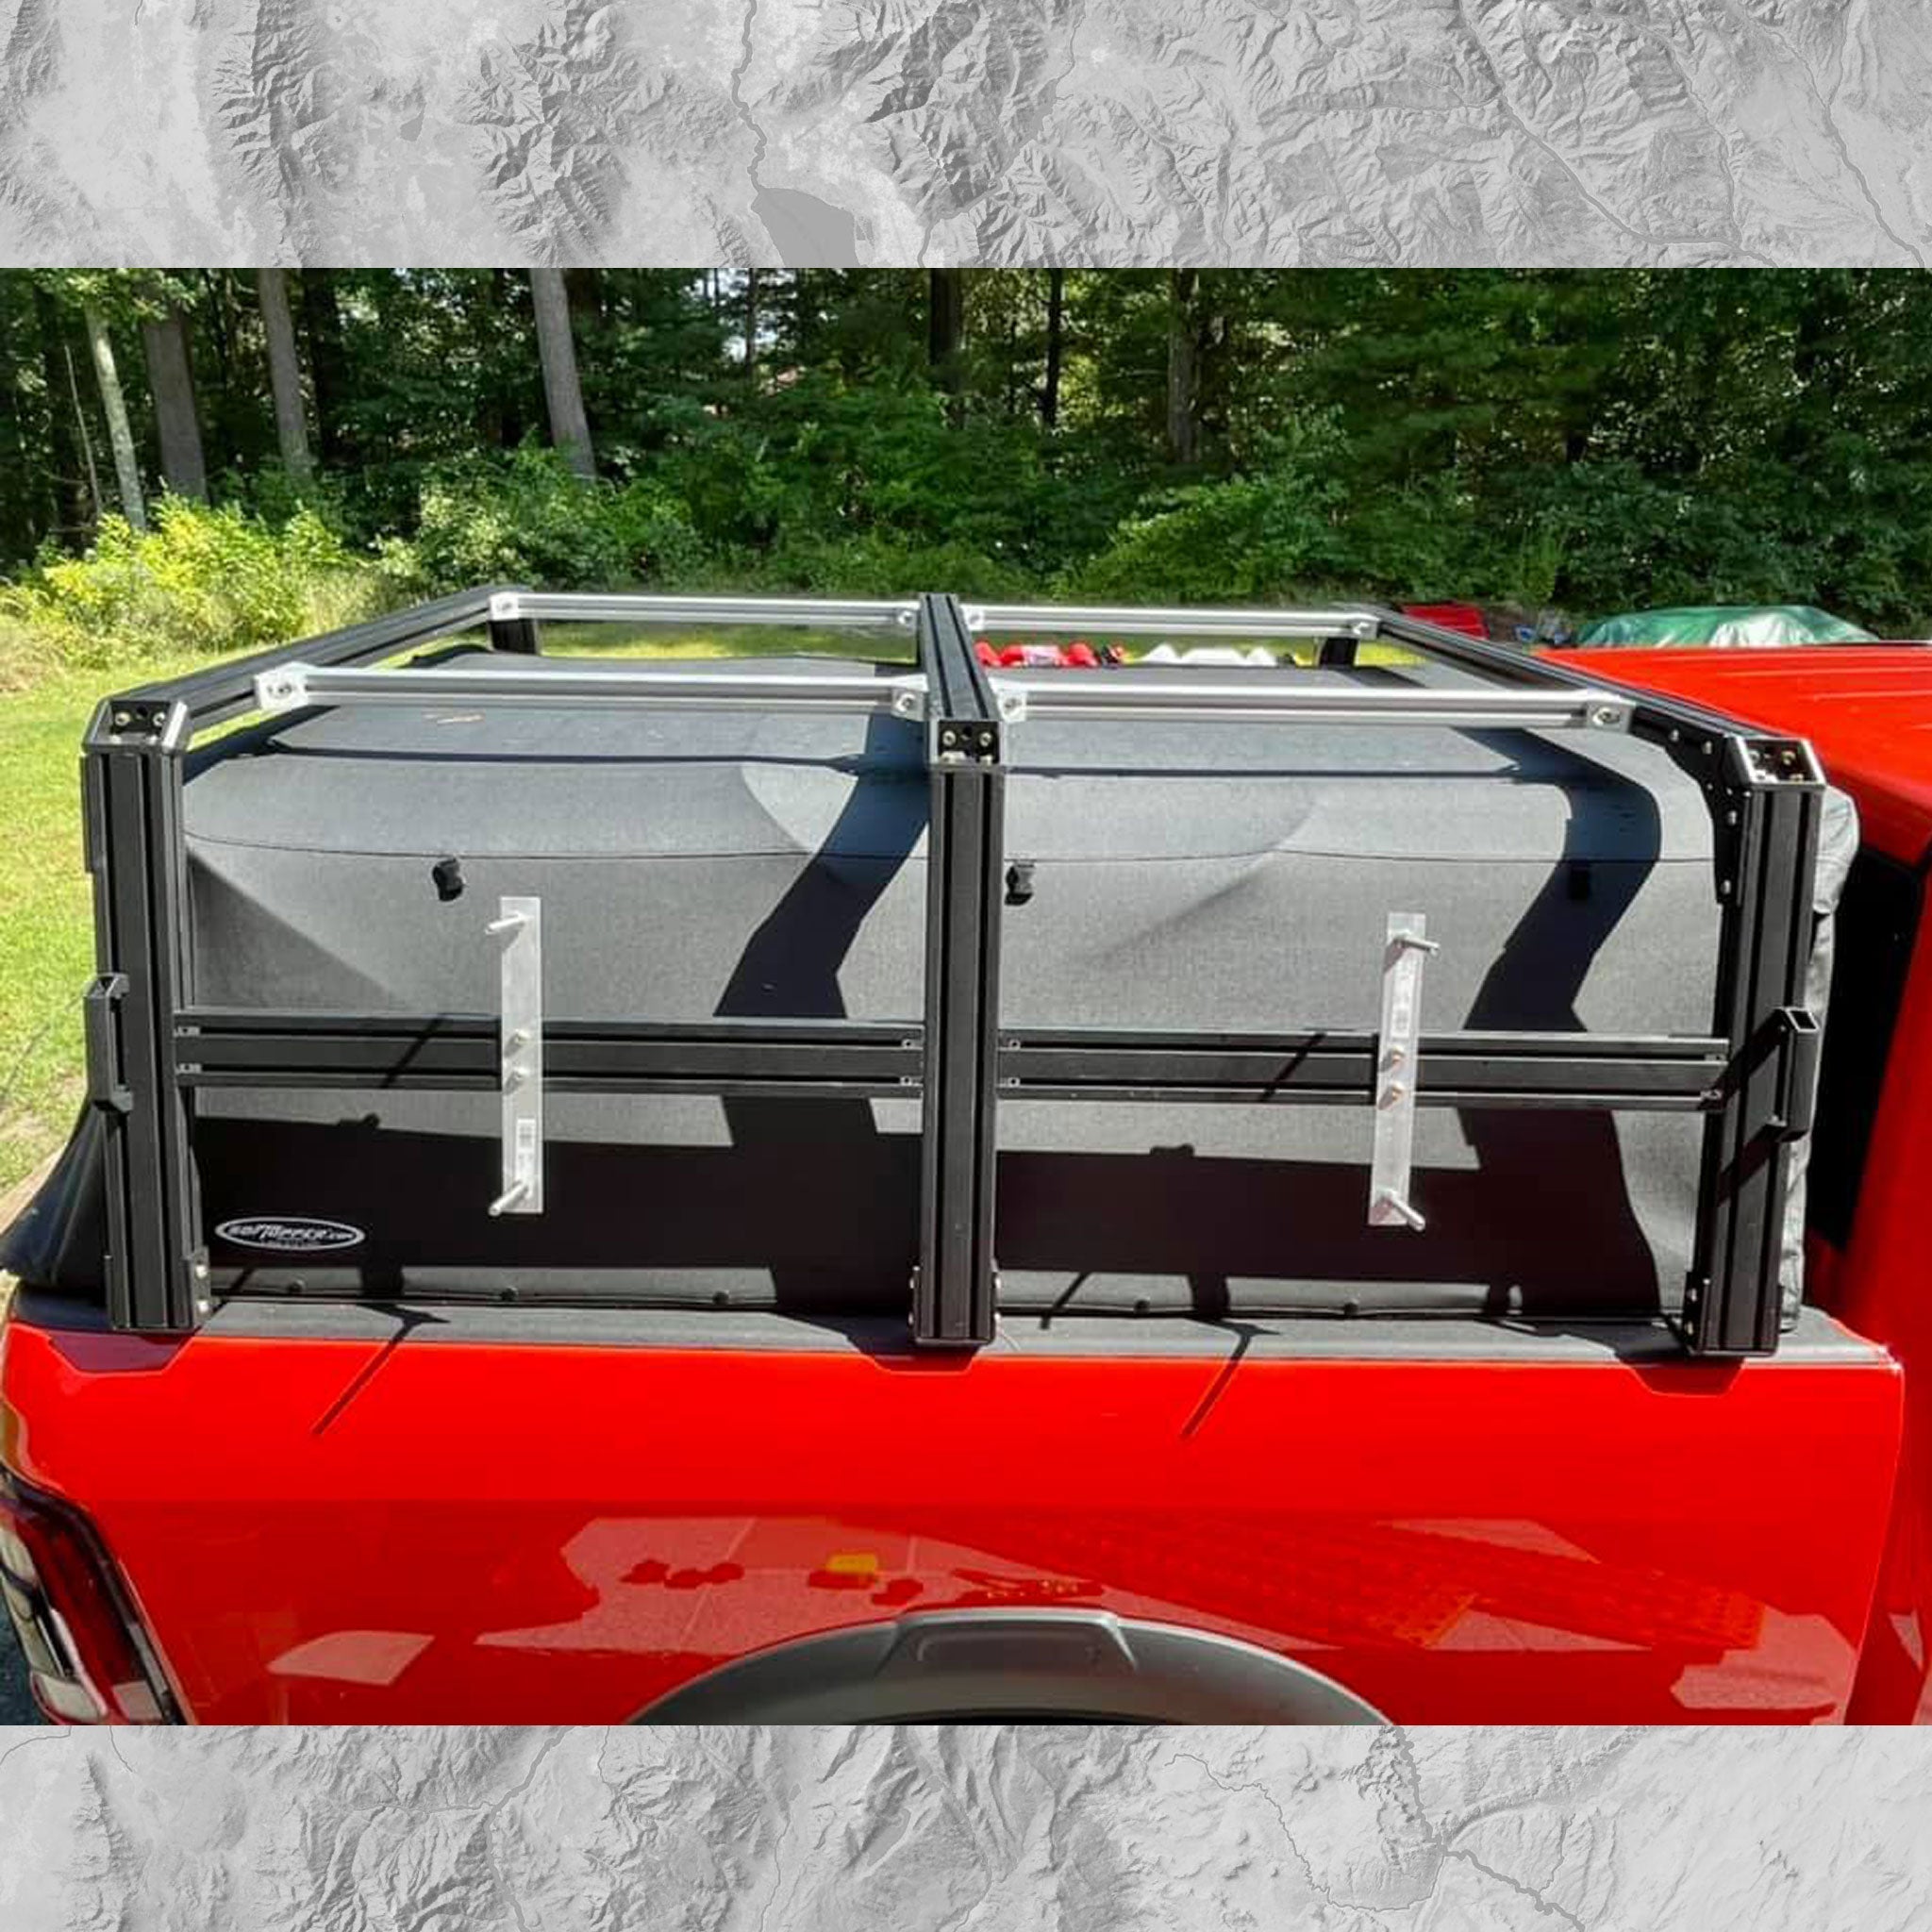 RAM 2500 Xtrusion Overland XTR1 HD (Heavy Duty) Bed Rack build with triple column uprights, traction boards mounts, and SofTopper